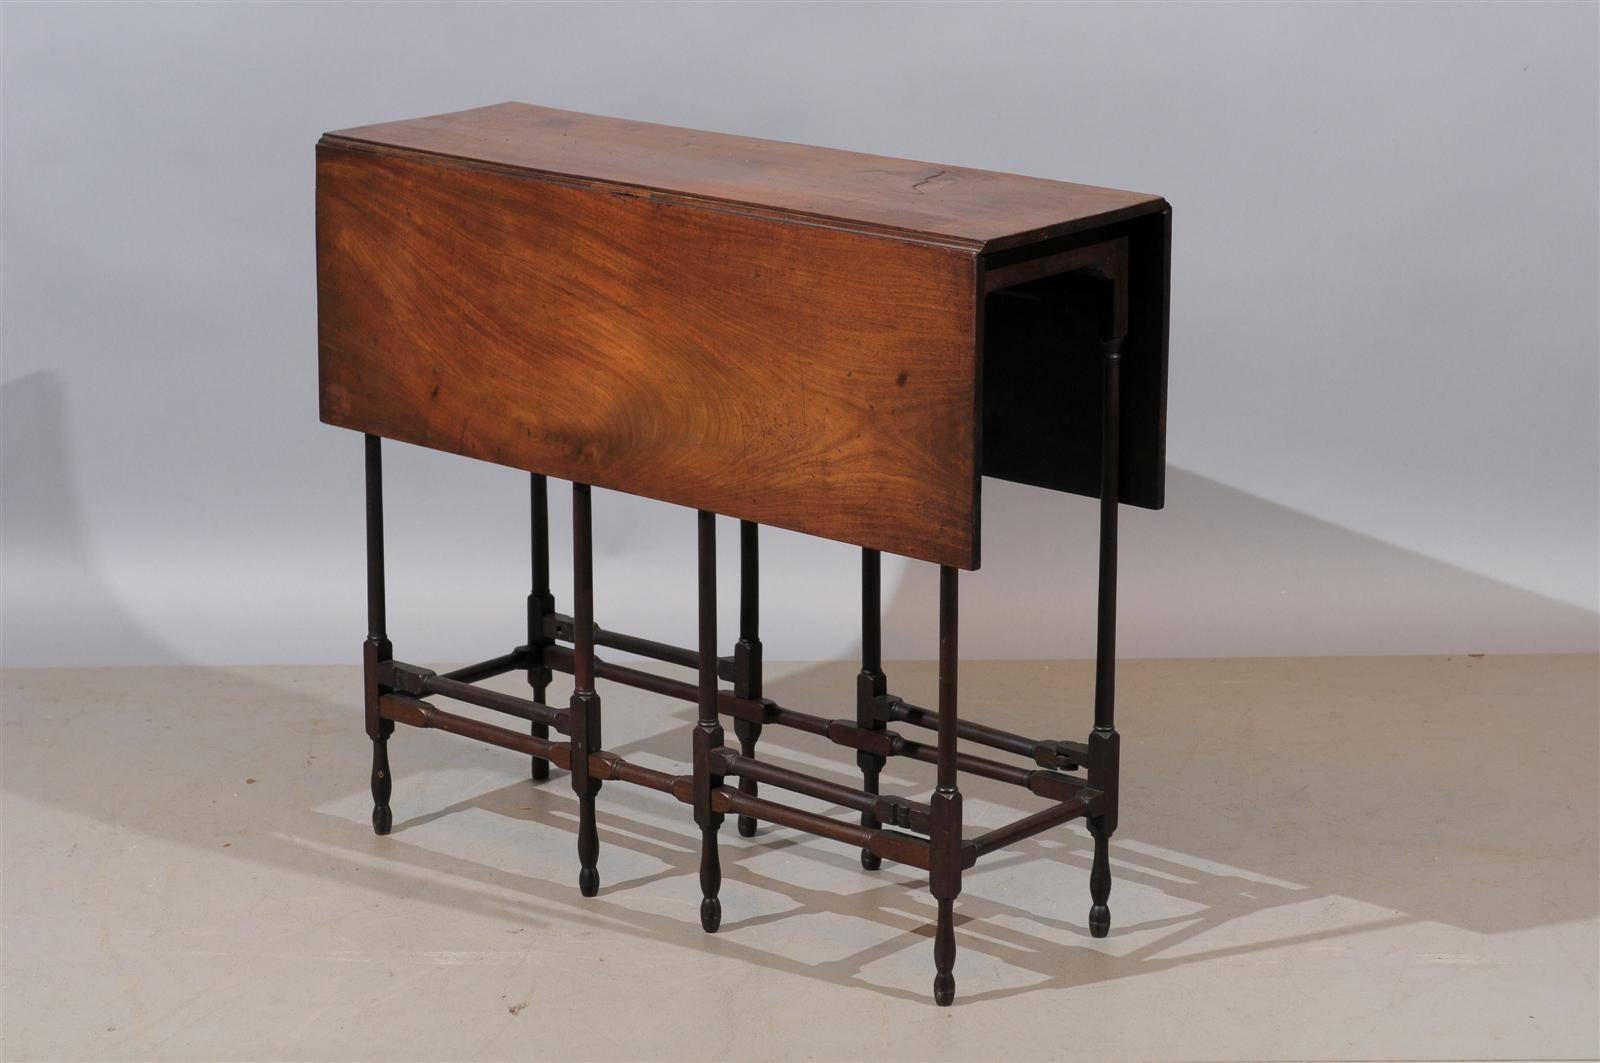 A 19th century English mahogany spider leg drop-leaf table. 

The dimensions closed is 11.75